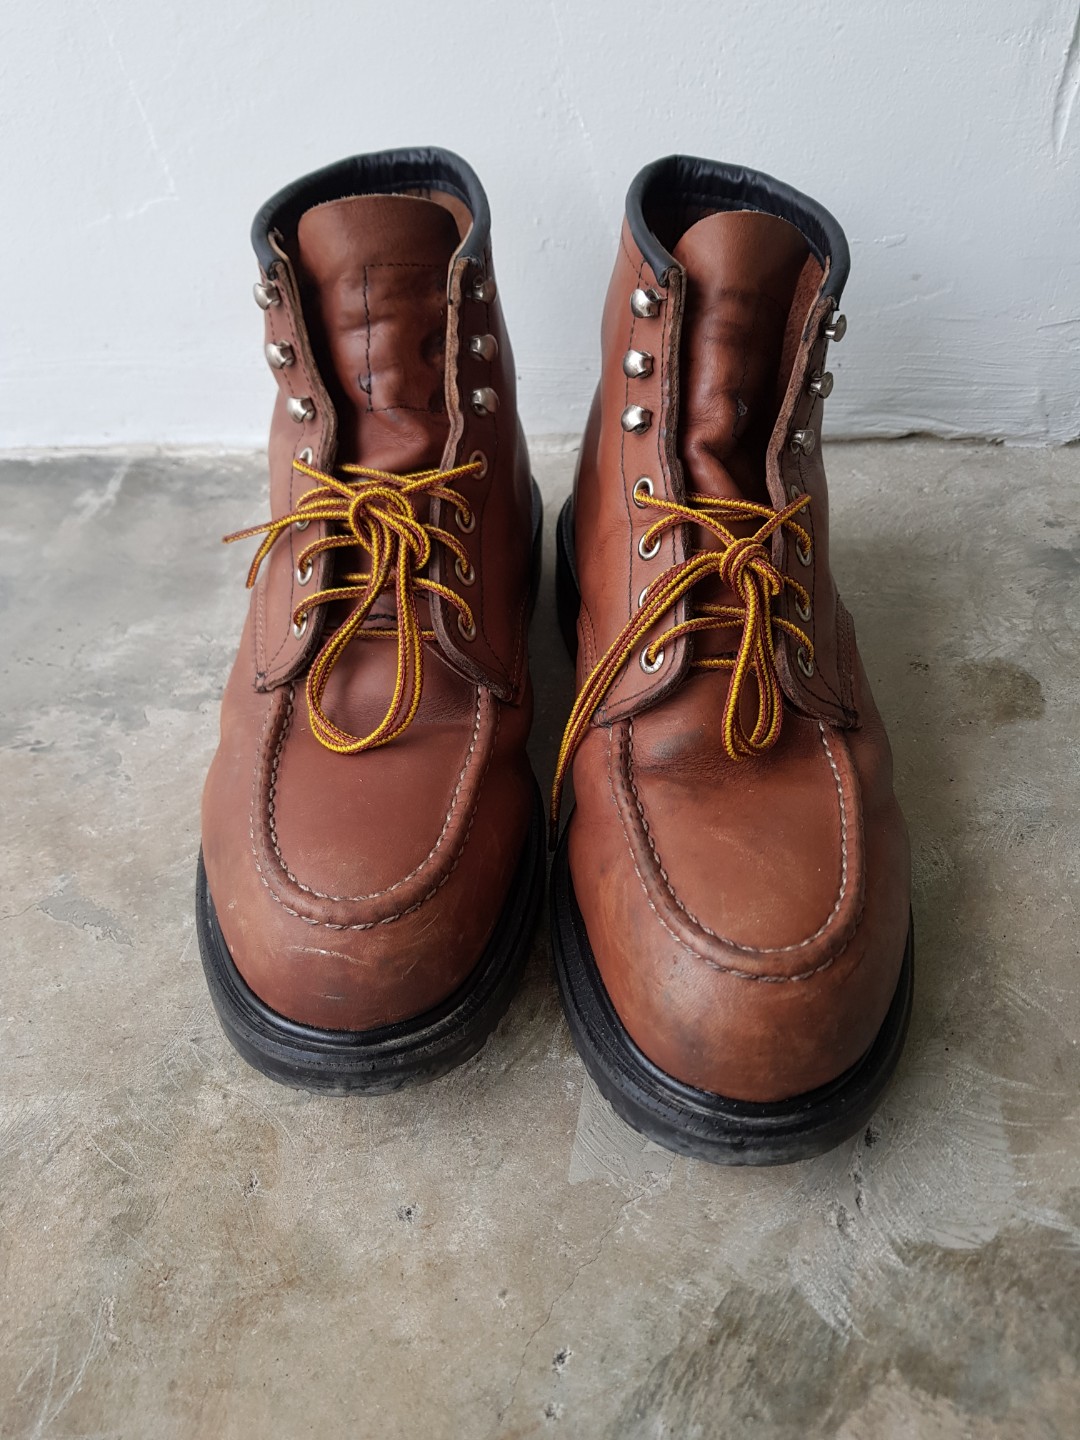 red wing moc toe work boots